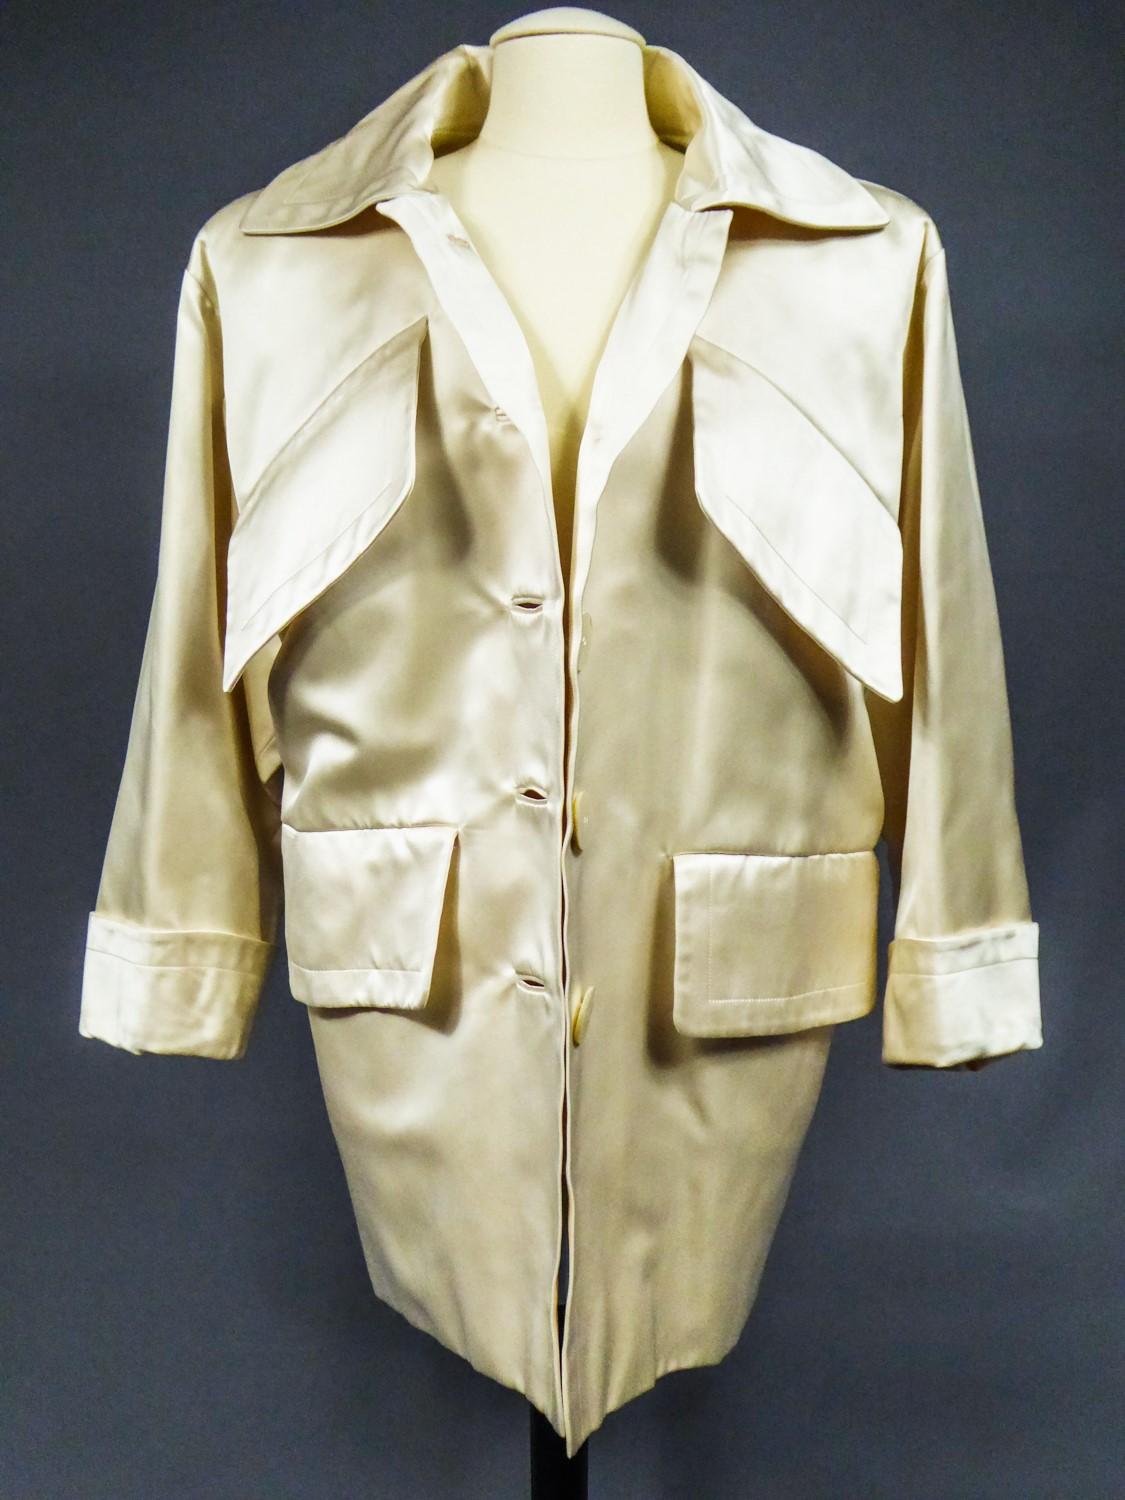 On hold for a french exhibition until November 2024, available after this date
Circa 1988/1990
France

Oversize Caban coat or navy-inspired sailor coat in cream silk satin by Yves Saint Laurent Haute Couture dating from the late 1980s. Provenance of